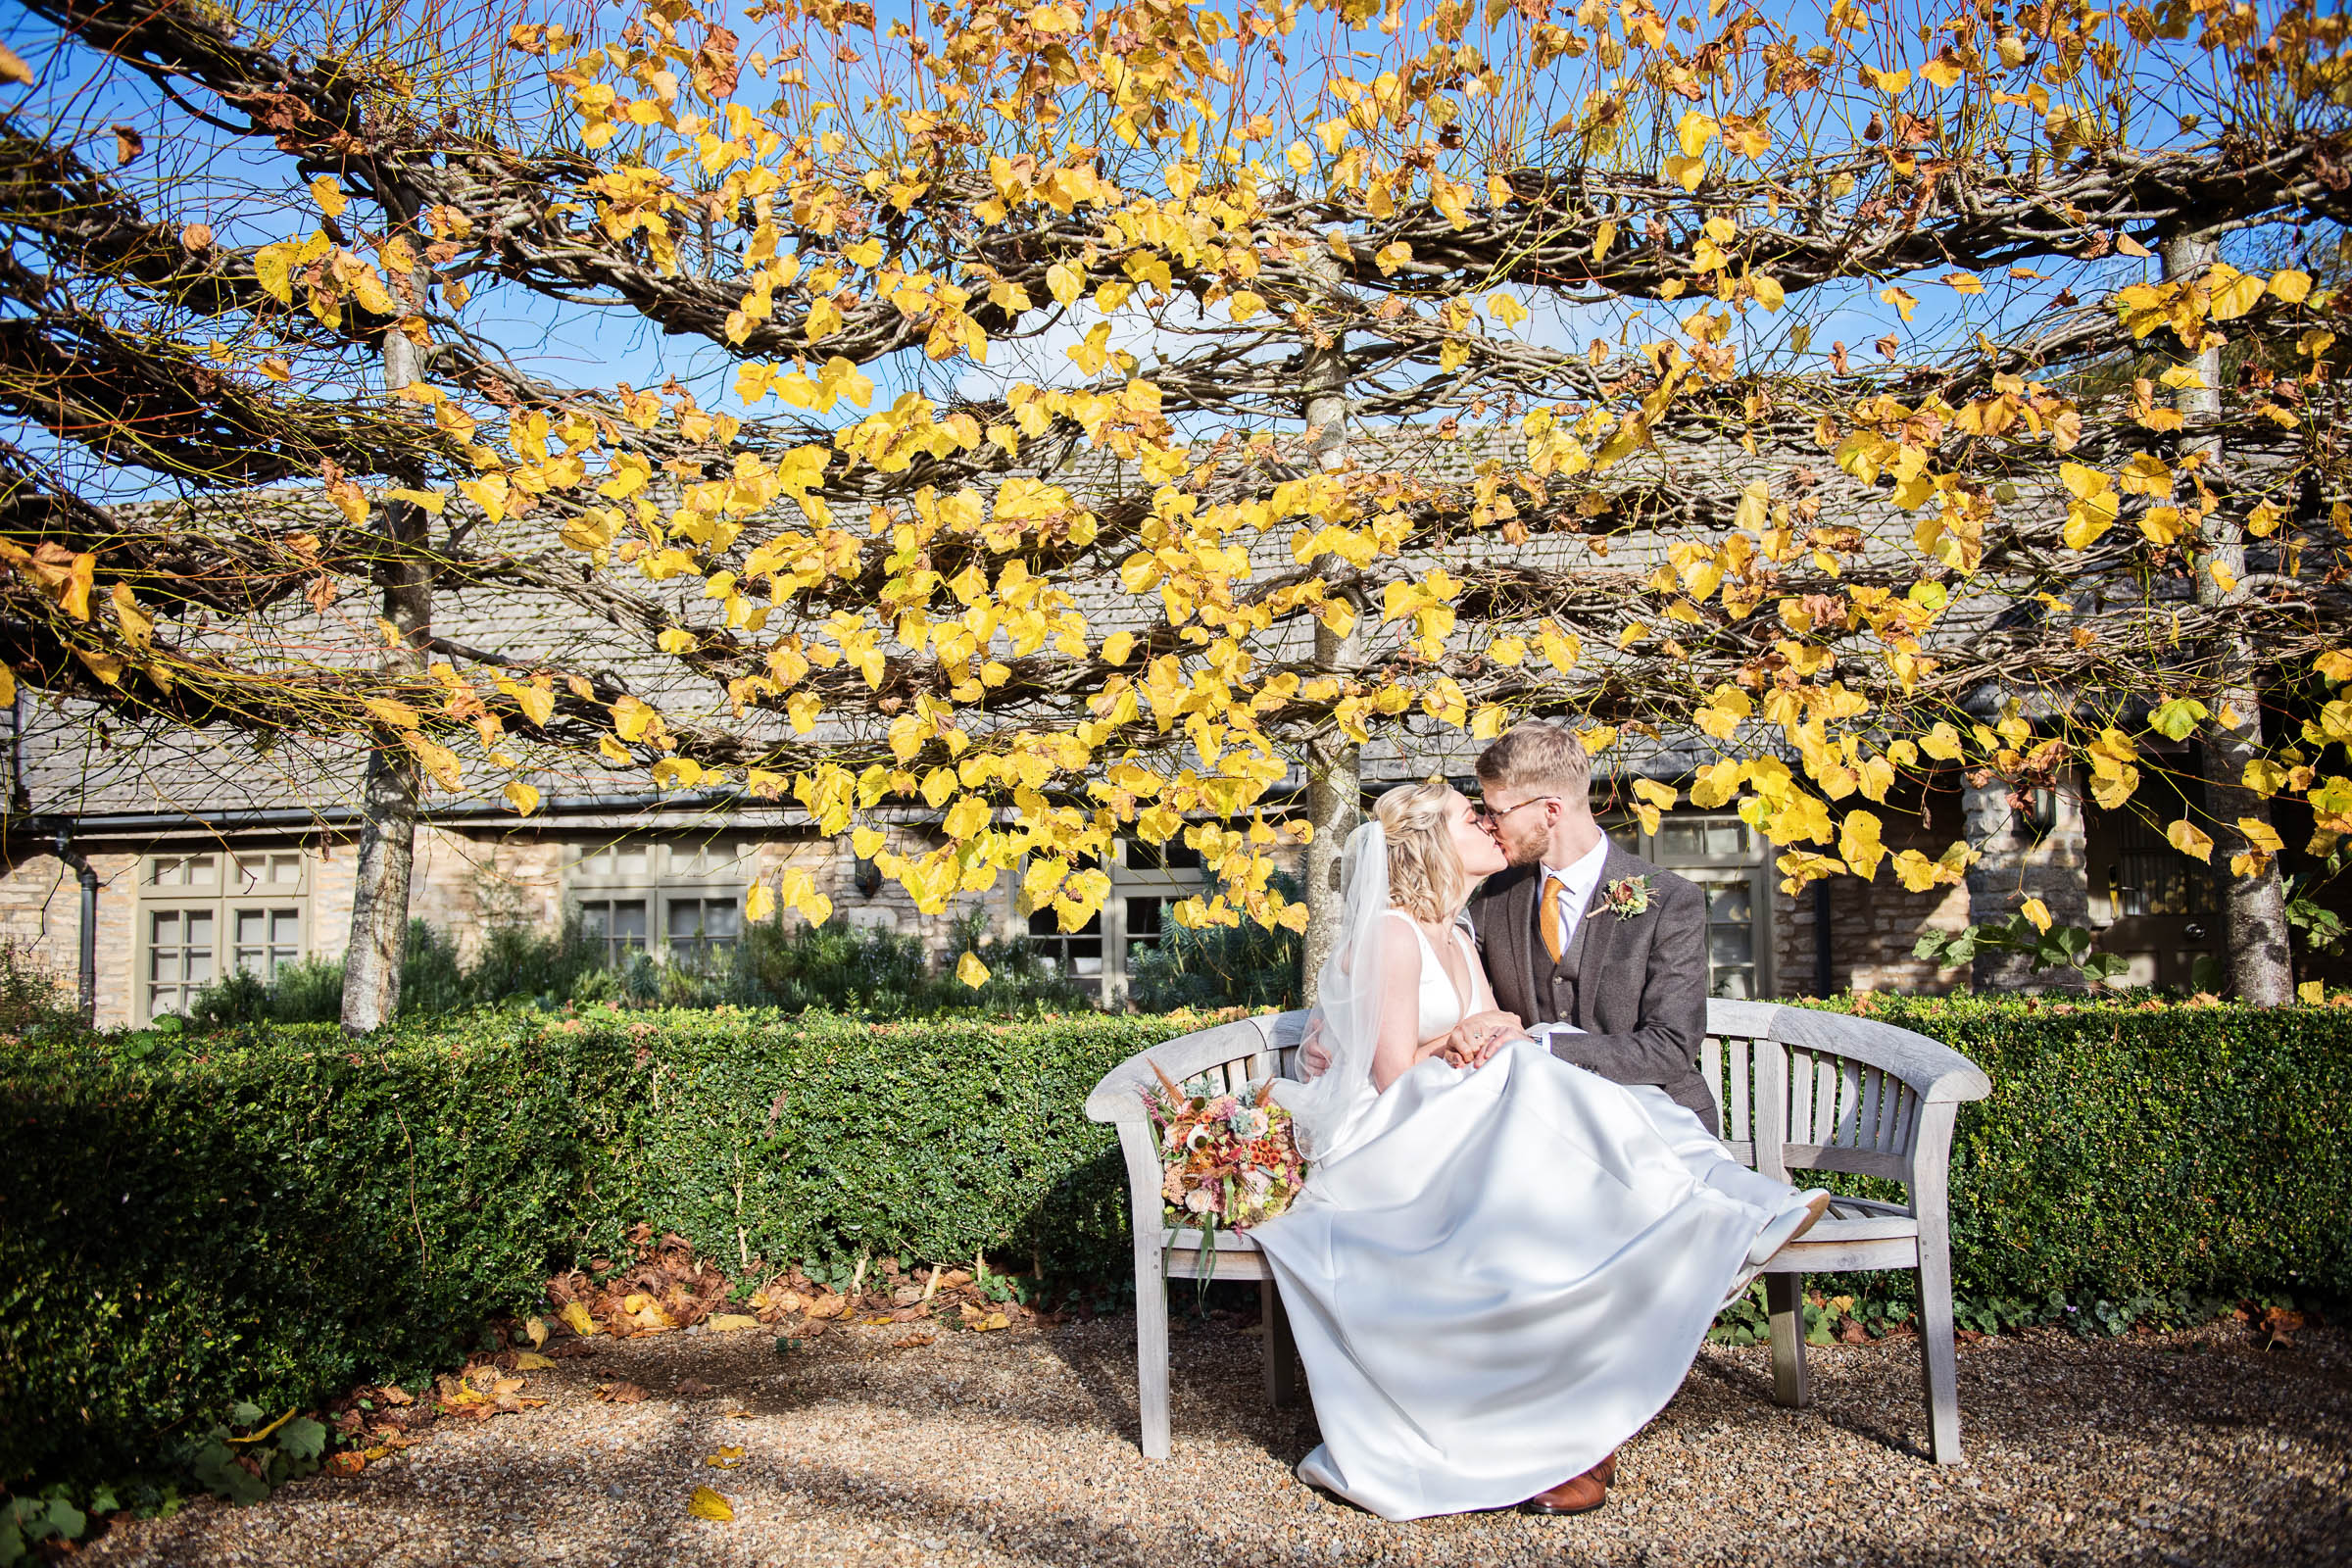 Bride & Groom sit on a bench surrounded by autumnal colour having a quick kiss!  